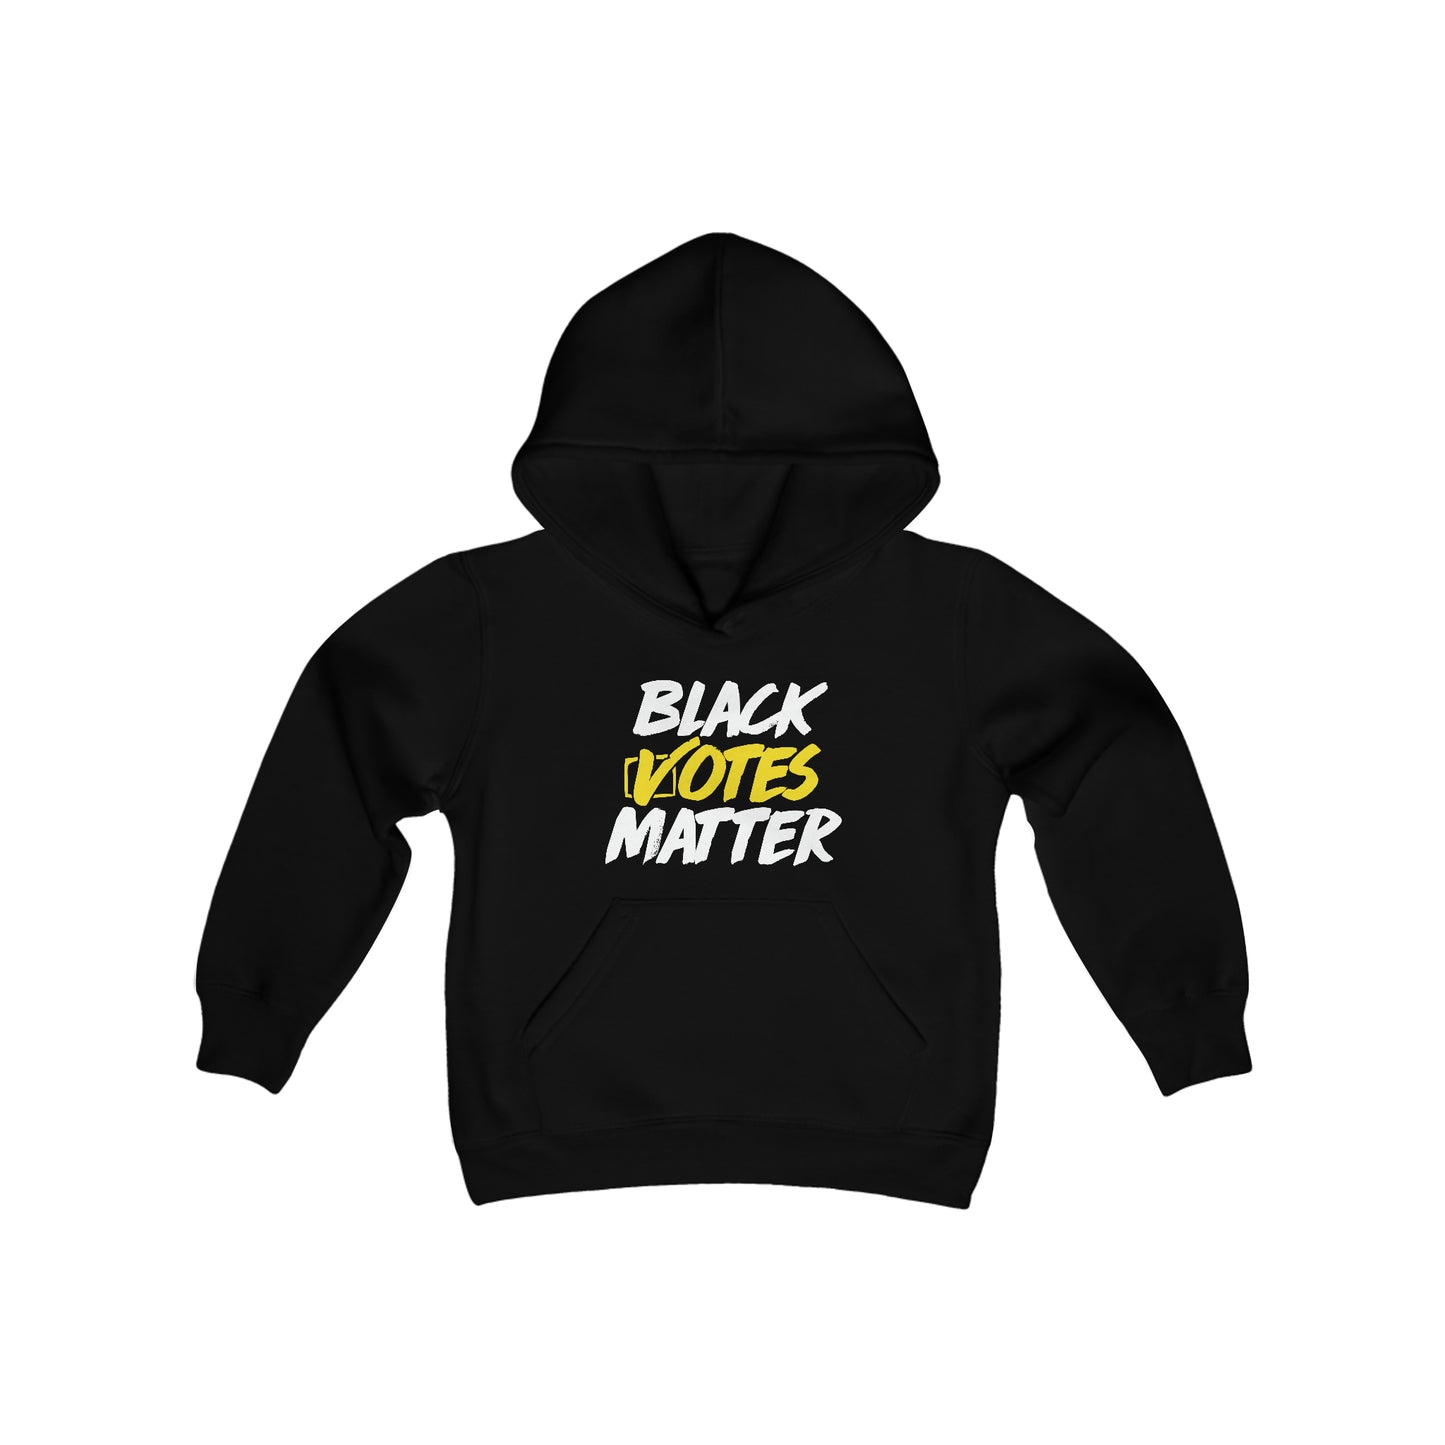 “Black Votes Matter (white text)” Youth Hoodie